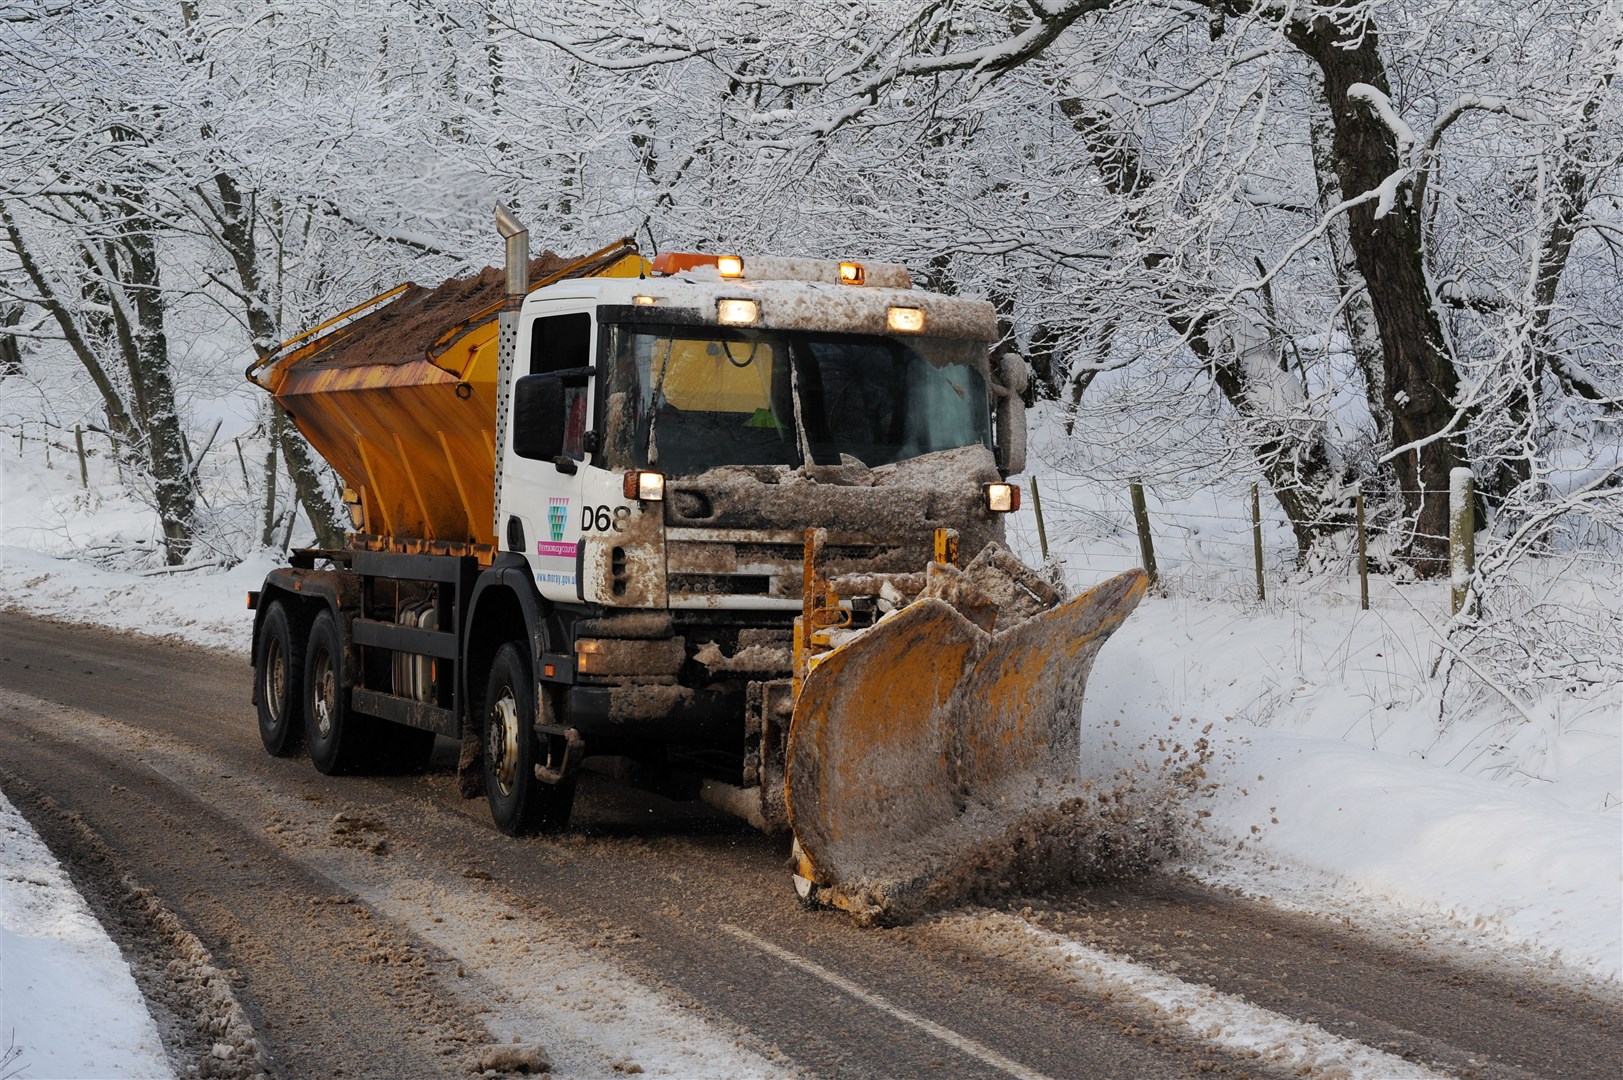 Rhoda Grant says Highland Council needs more cash from the Scottish Government to ensure roads are gritted properly.